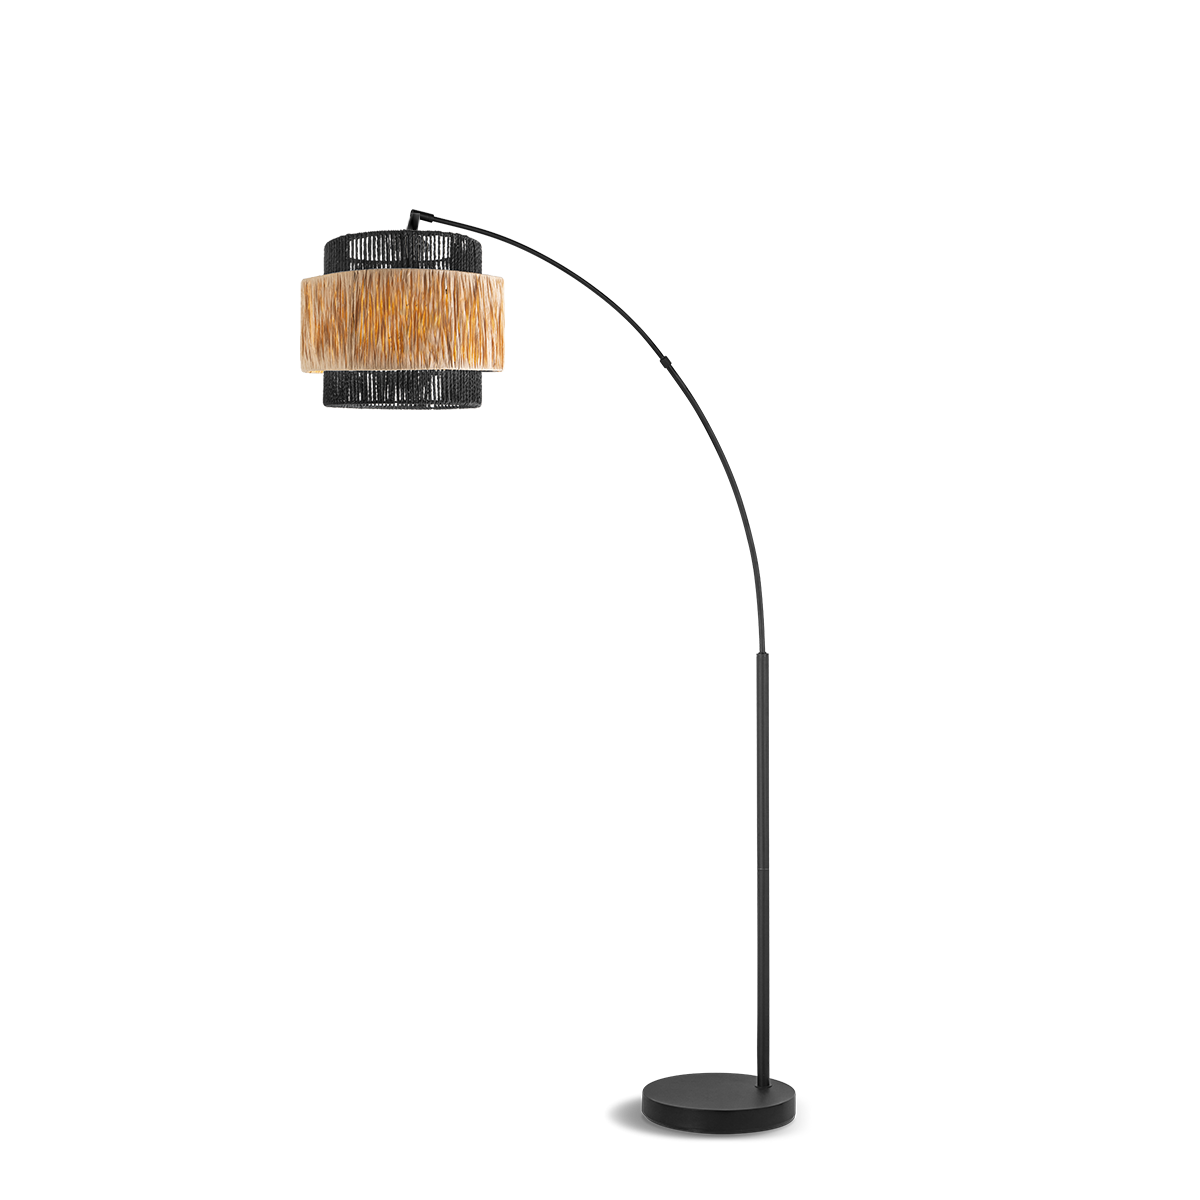 Tangla lighting - TLF7574-01SEAG - LED Floor lamp 1 Light - metal and sea grass - natural and black - fischer - E27